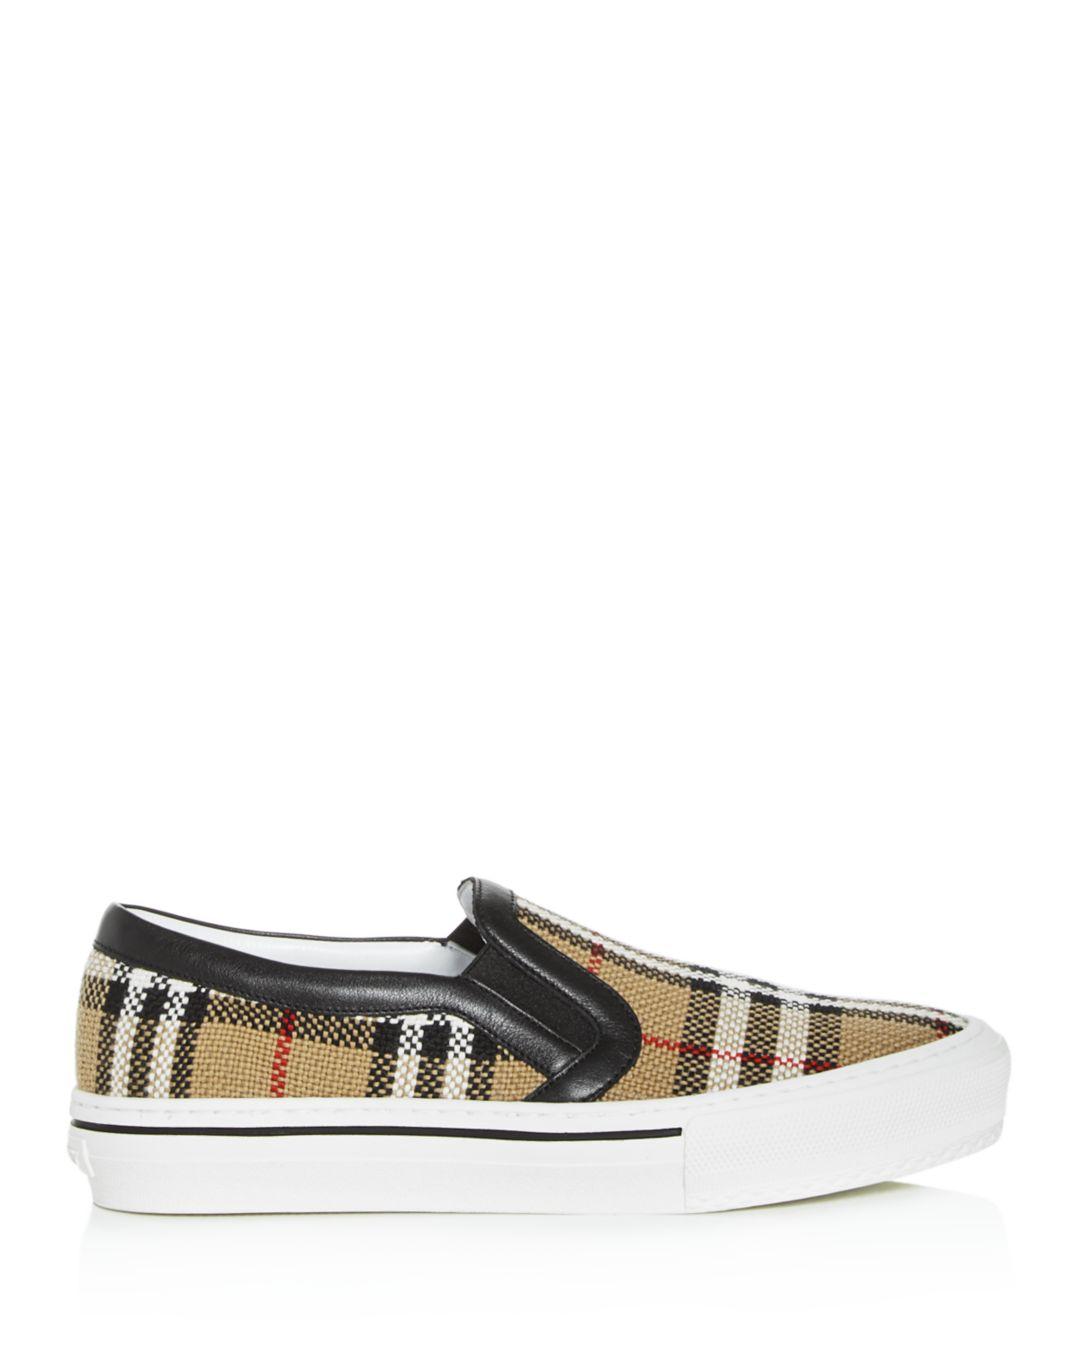 Burberry Vintage Check And Leather Slip 